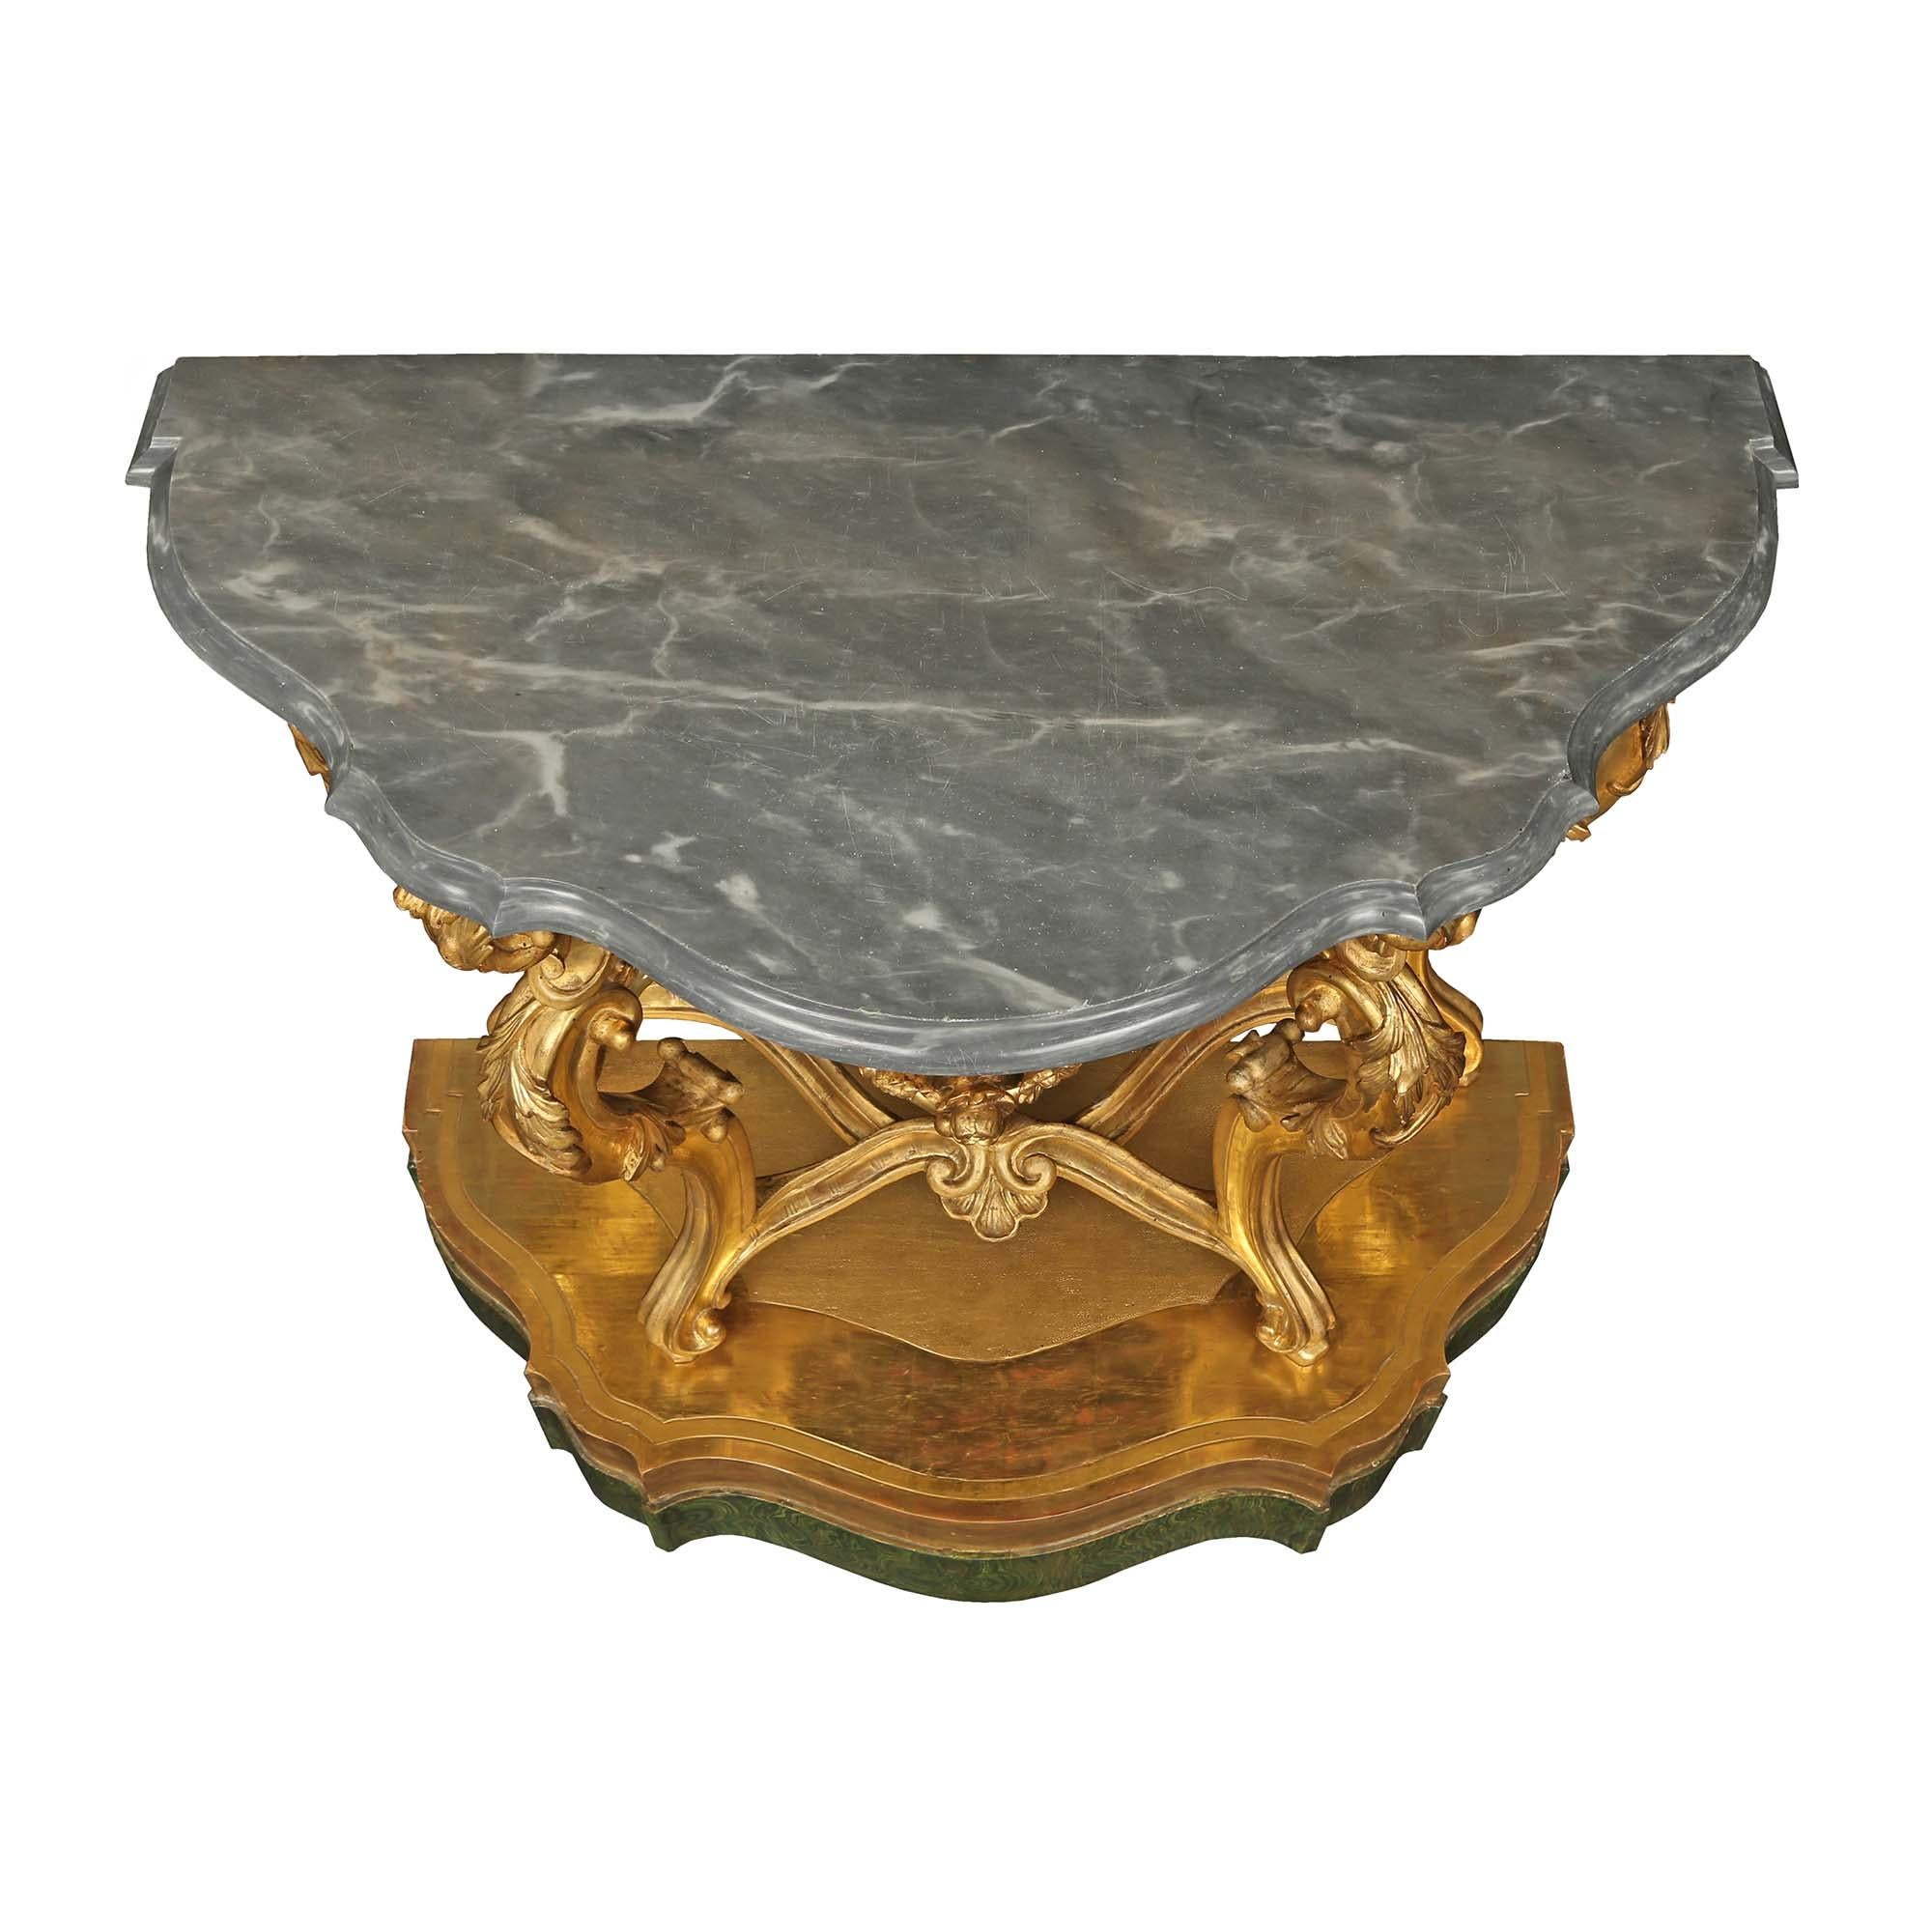 A sensational and high quality pair of Italian 18th century Baroque st. consoles from the Lombardi region. The consoles are raised by scalloped shaped faux painted malachite and giltwood bases with a stunning hammered design. Each display elegant